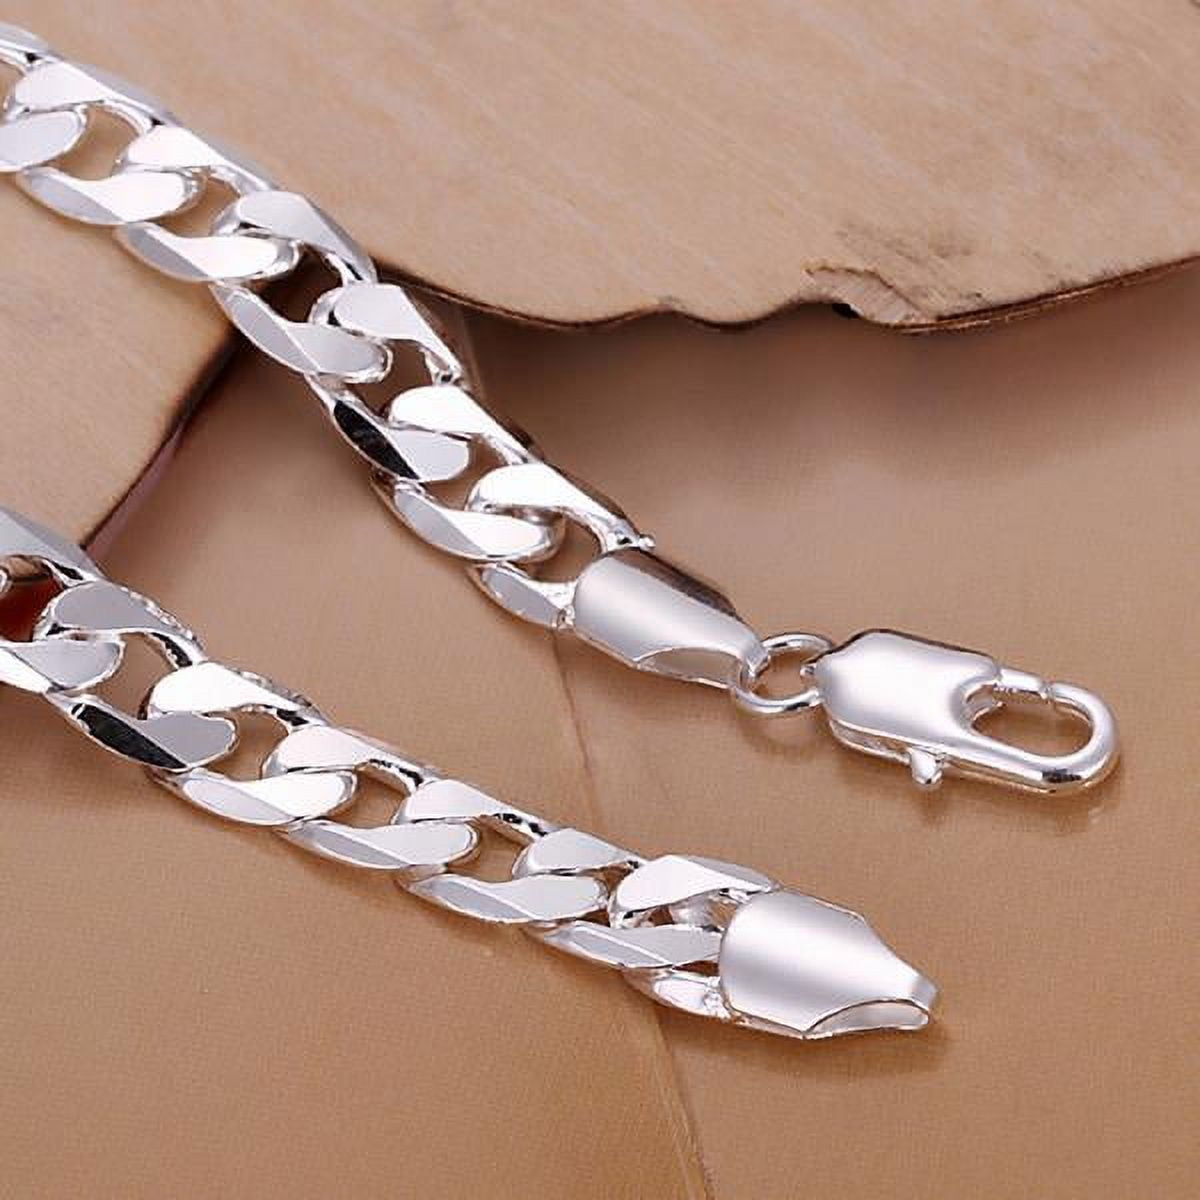  100% Real S925 Silver Jewelry 8MM Korean Necklace for